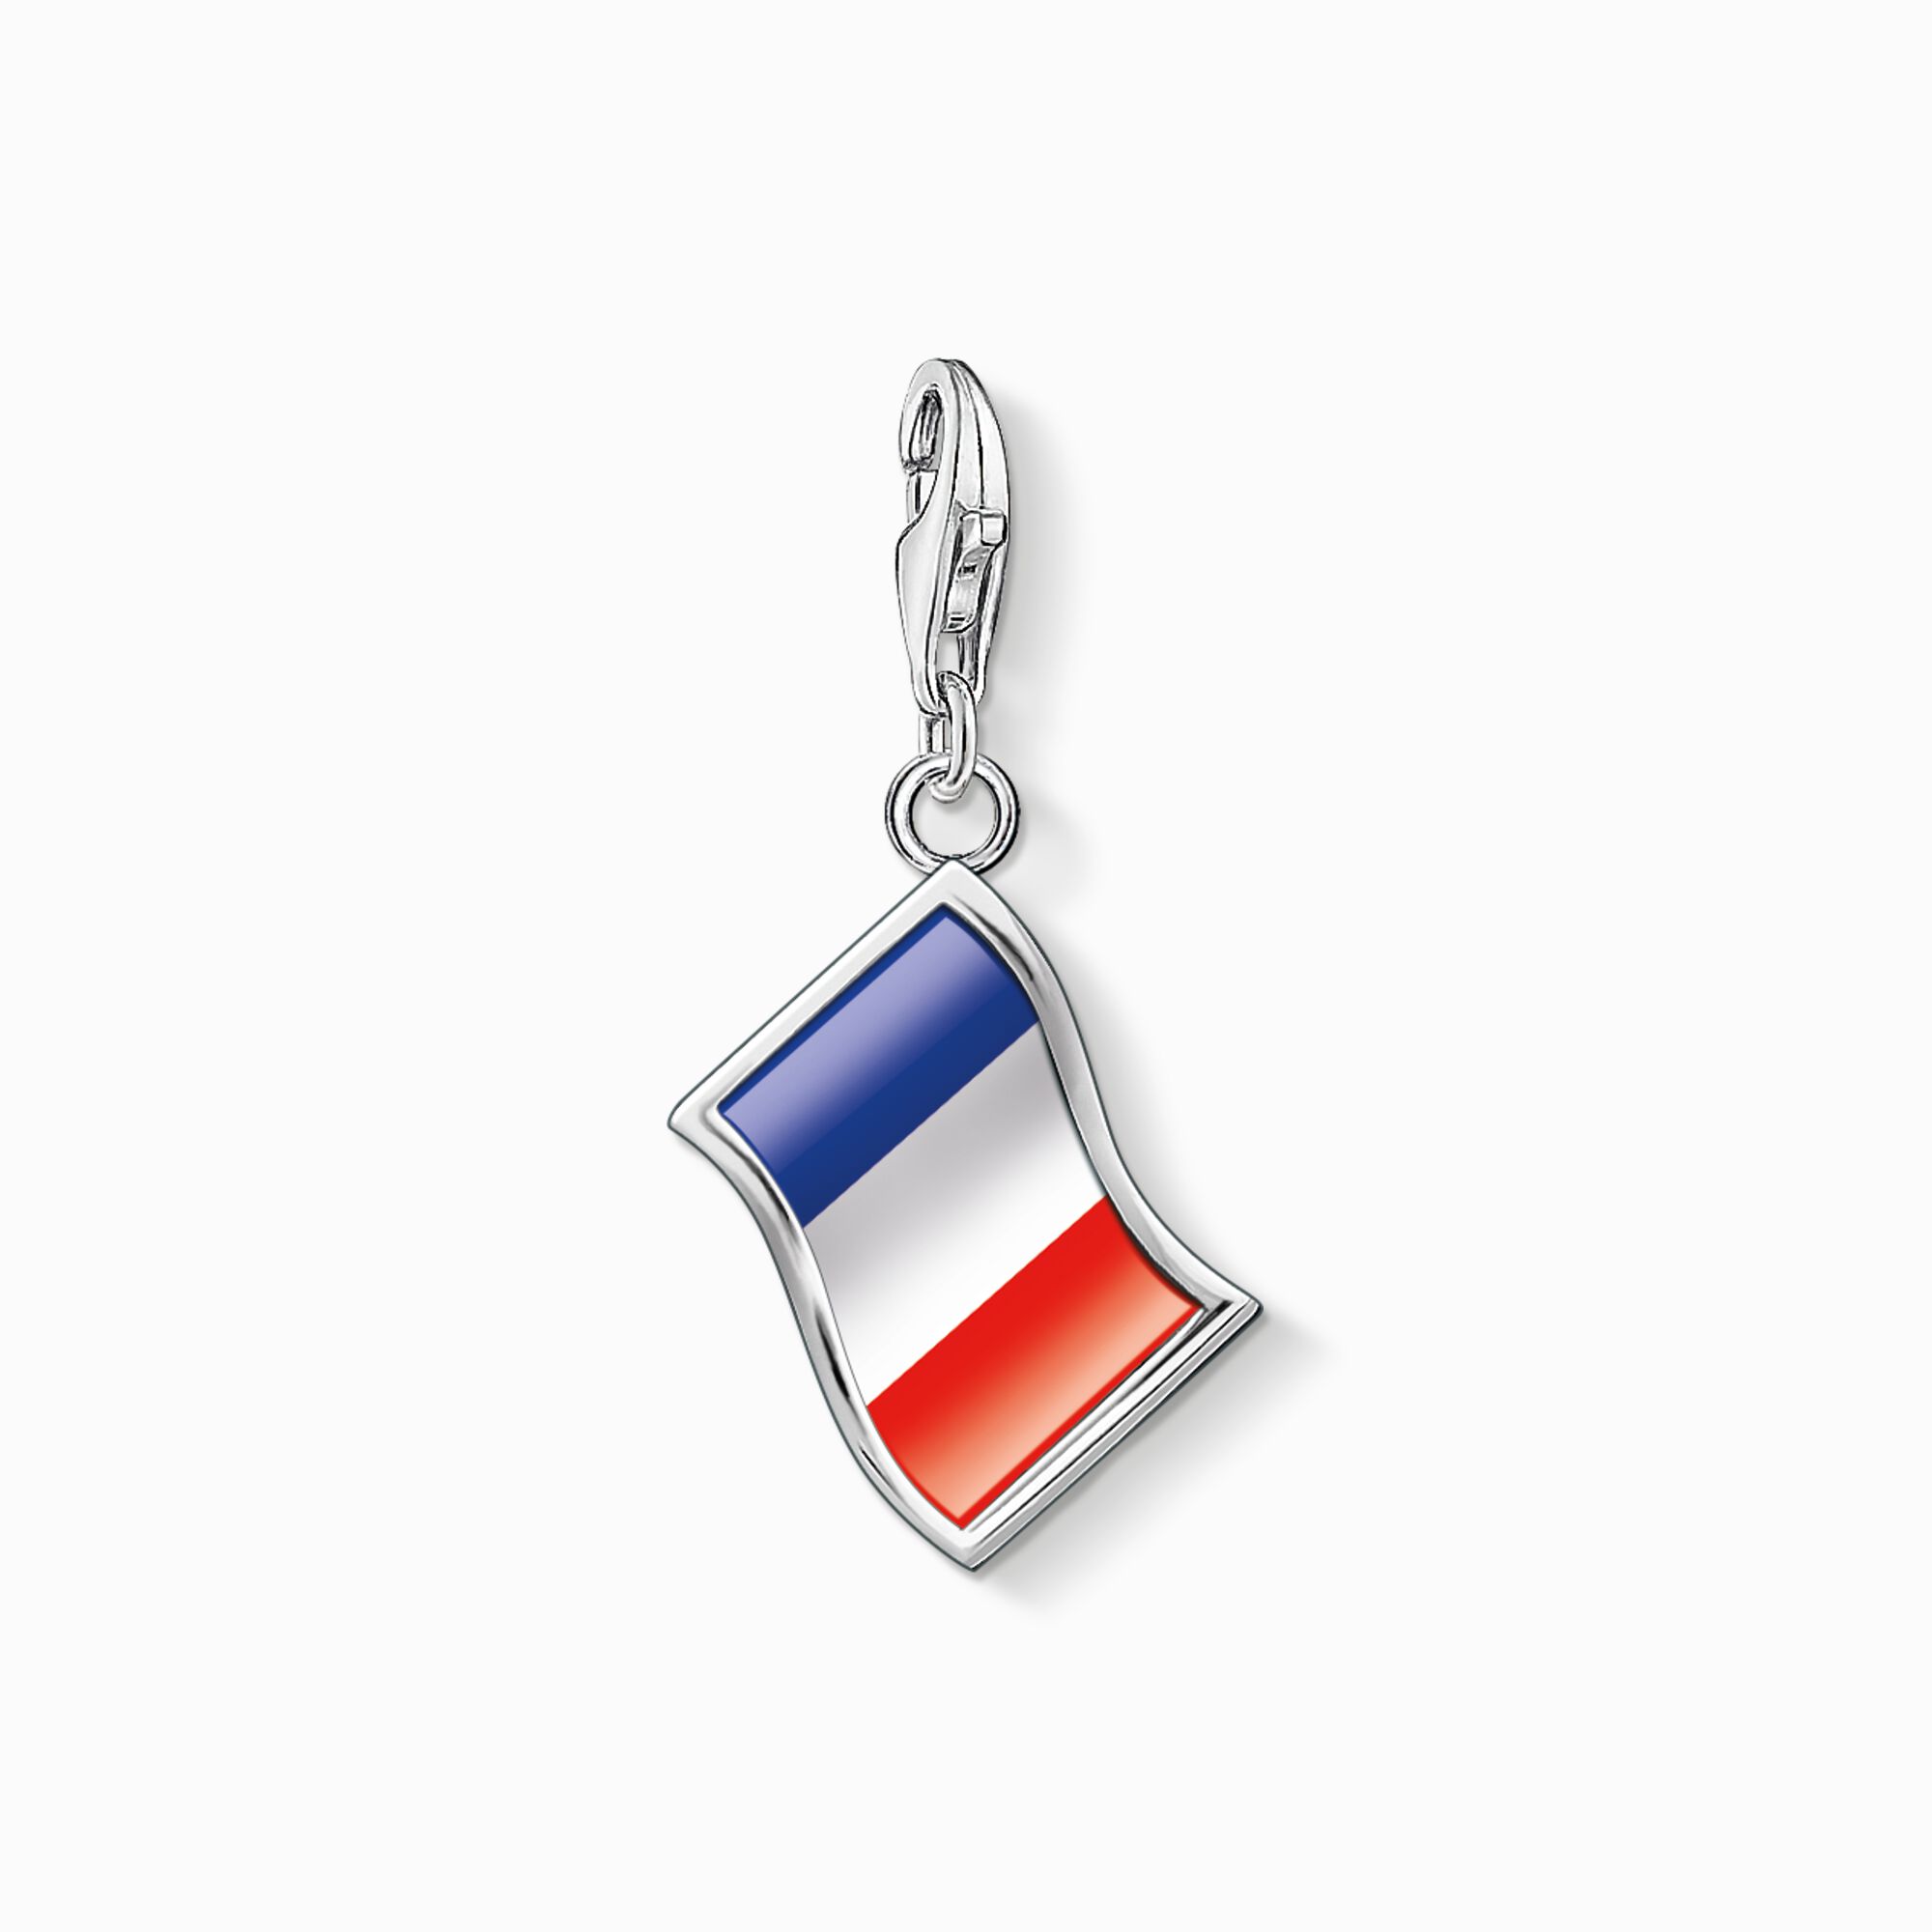 Silver charm pendant in french national flag design from the Charm Club collection in the THOMAS SABO online store